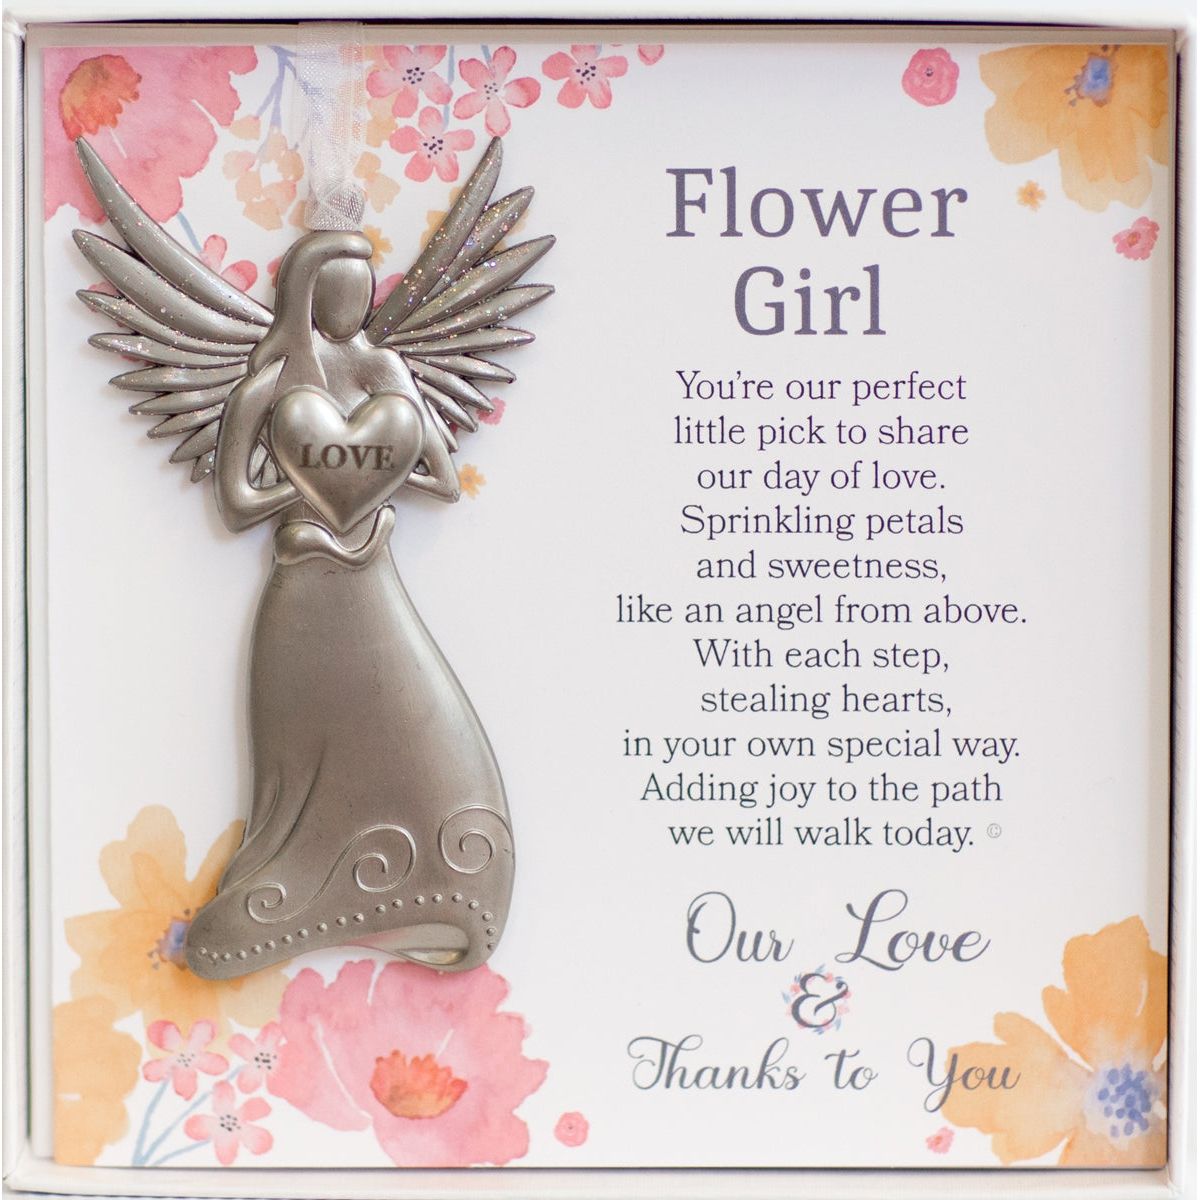 Flower Girl Gift - 4" metal love angel ornament with sparkle wings with "Flower Girl" poem in white box with clear lid.